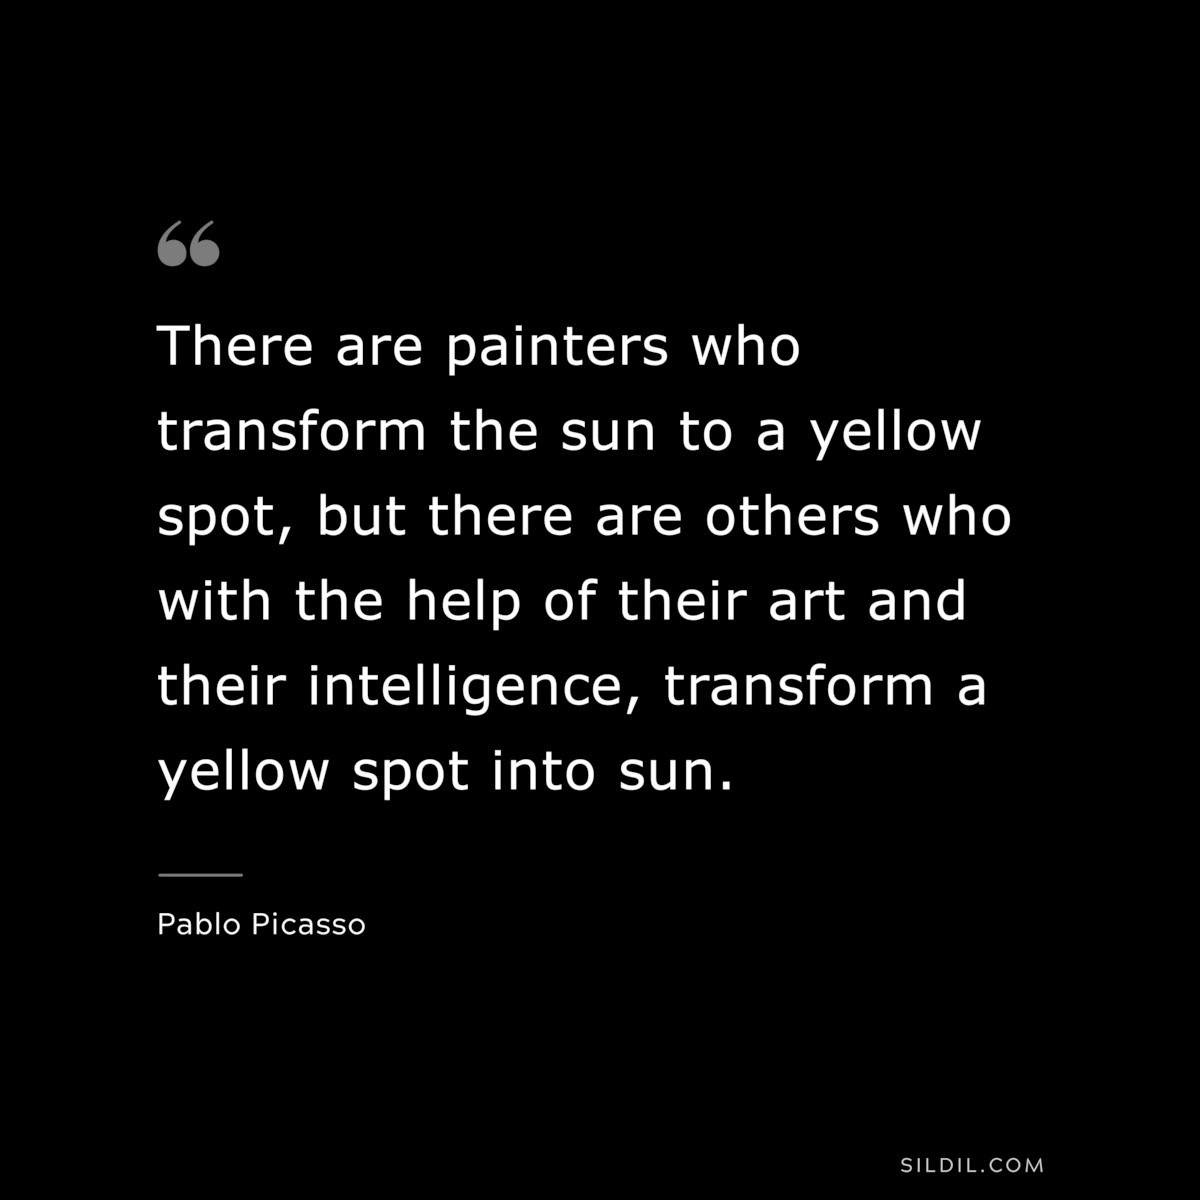 There are painters who transform the sun to a yellow spot, but there are others who with the help of their art and their intelligence, transform a yellow spot into sun. ― Pablo Picasso